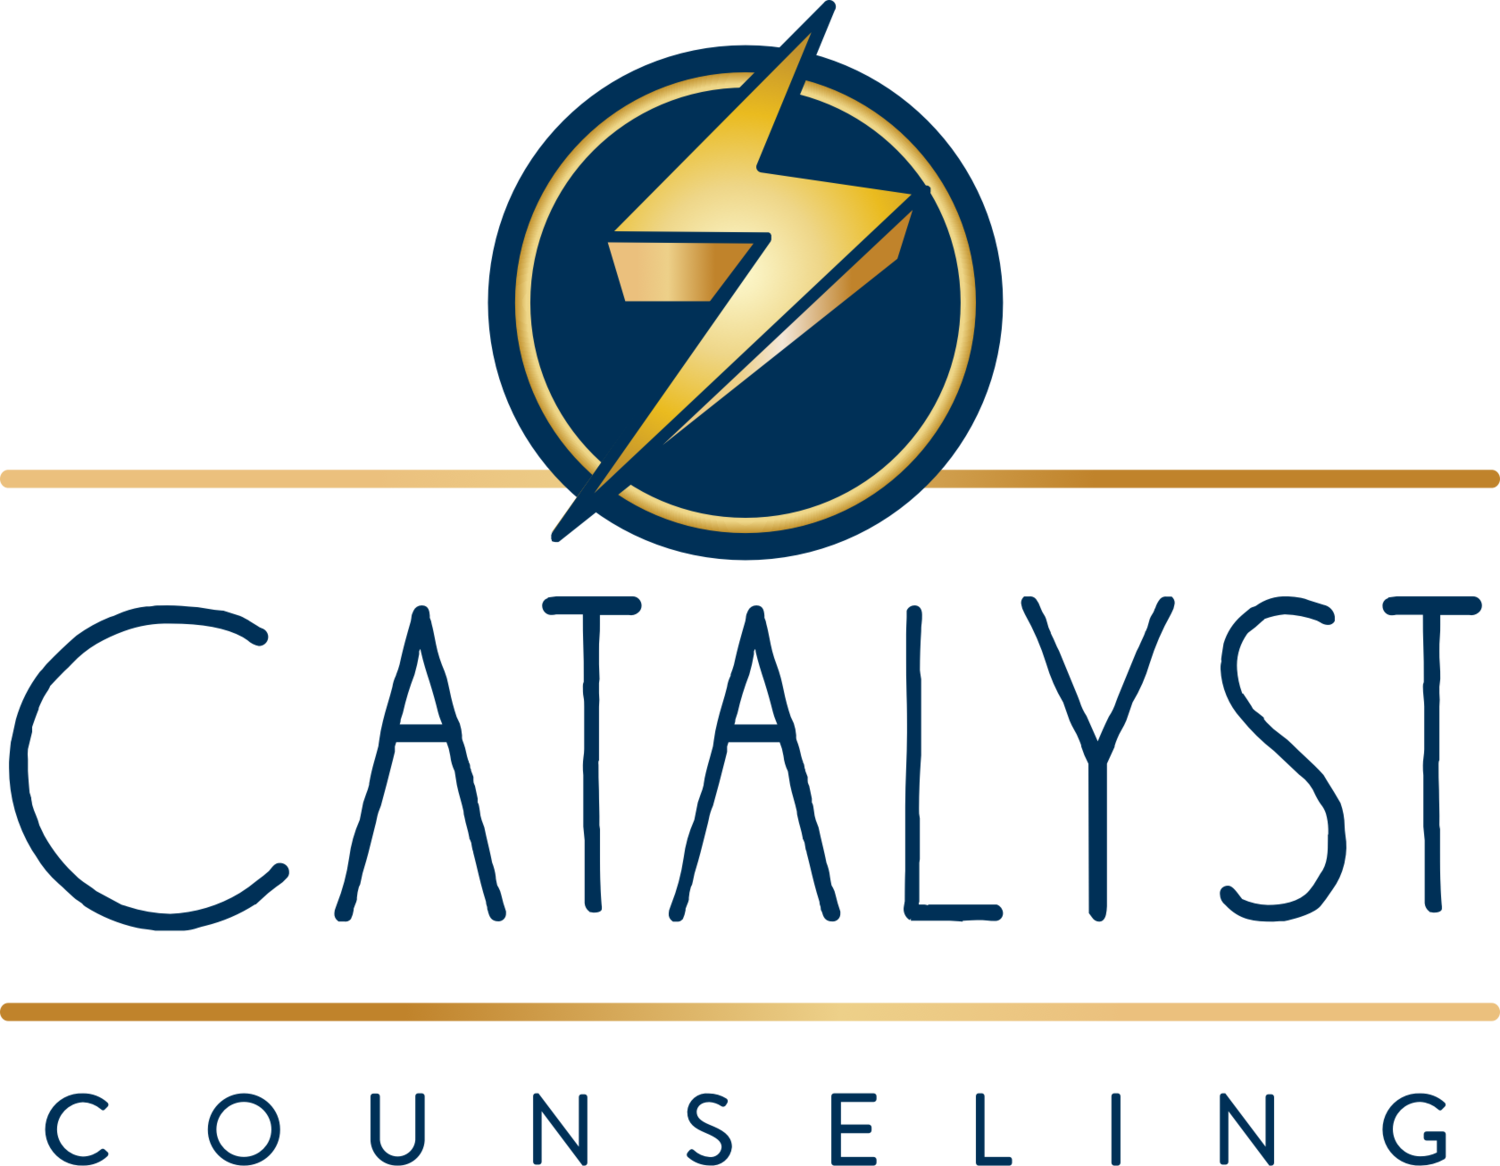 Catalyst Counseling-Houston, Texas